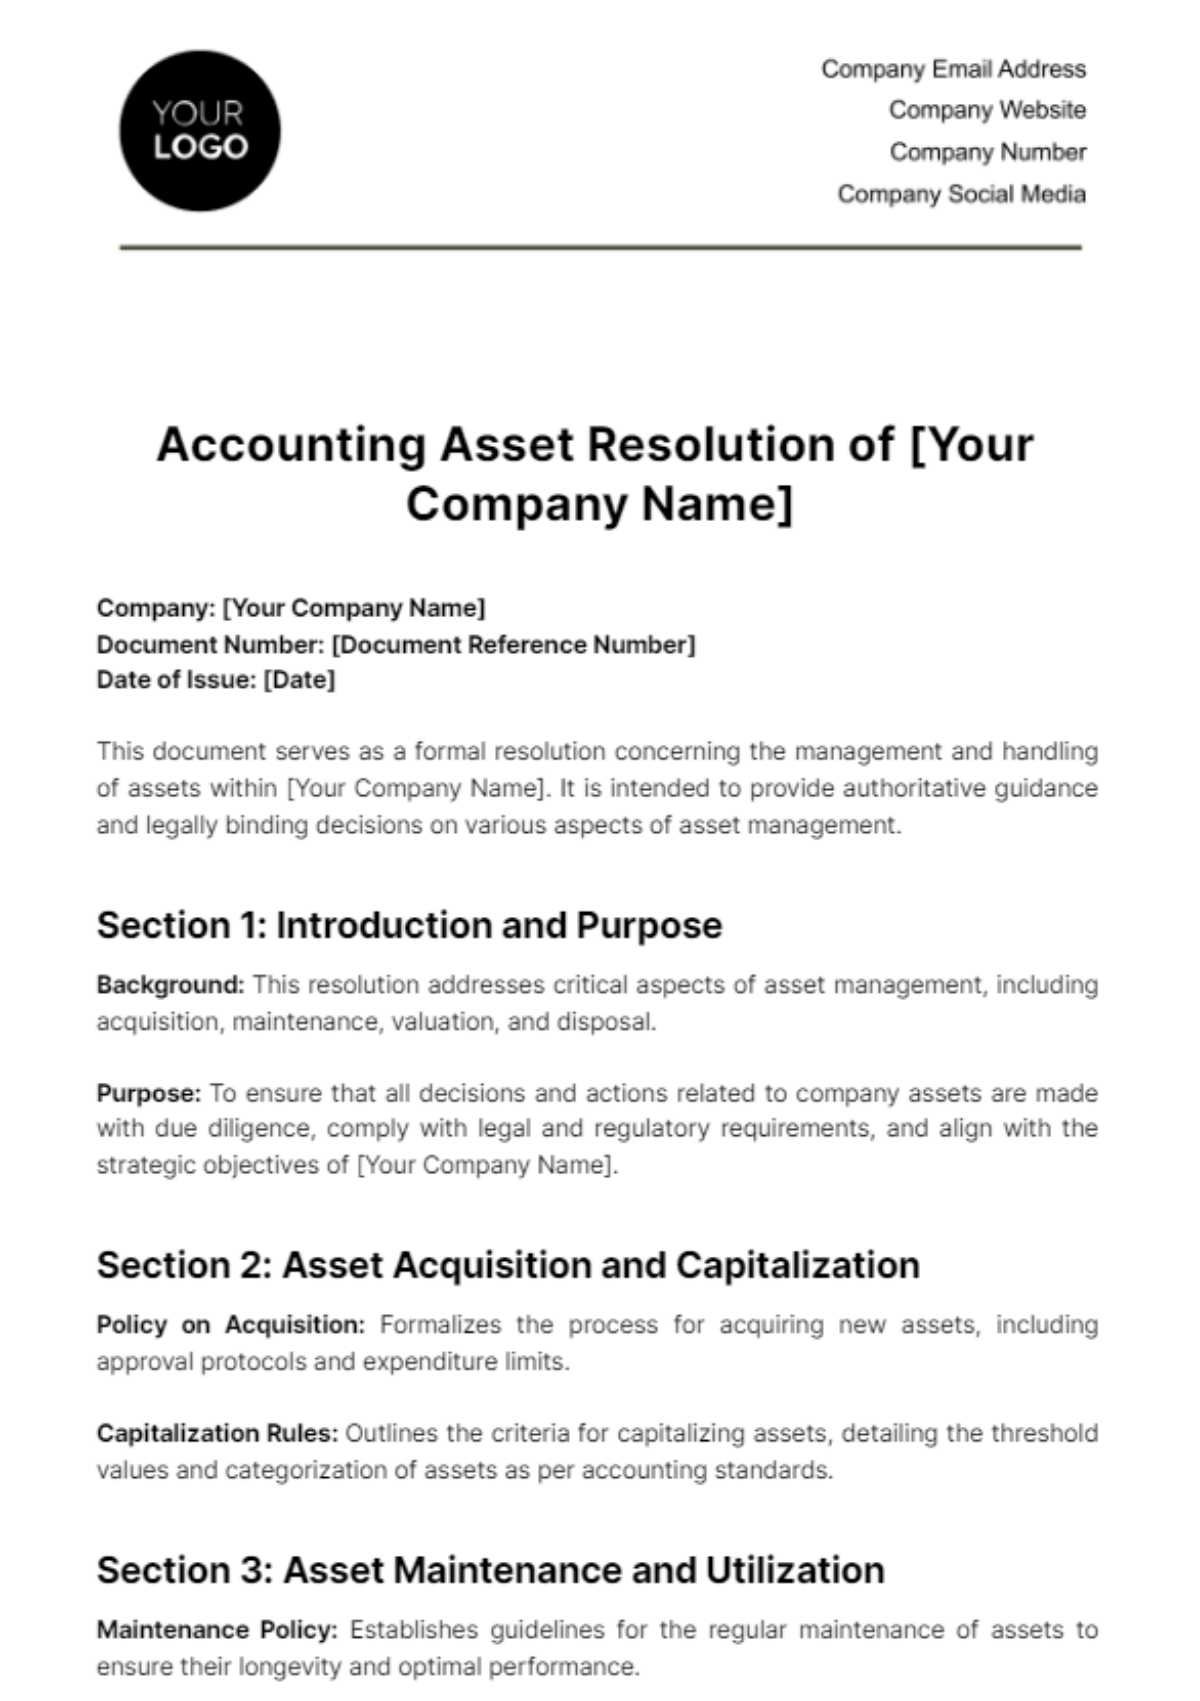 Accounting Asset Resolution Template